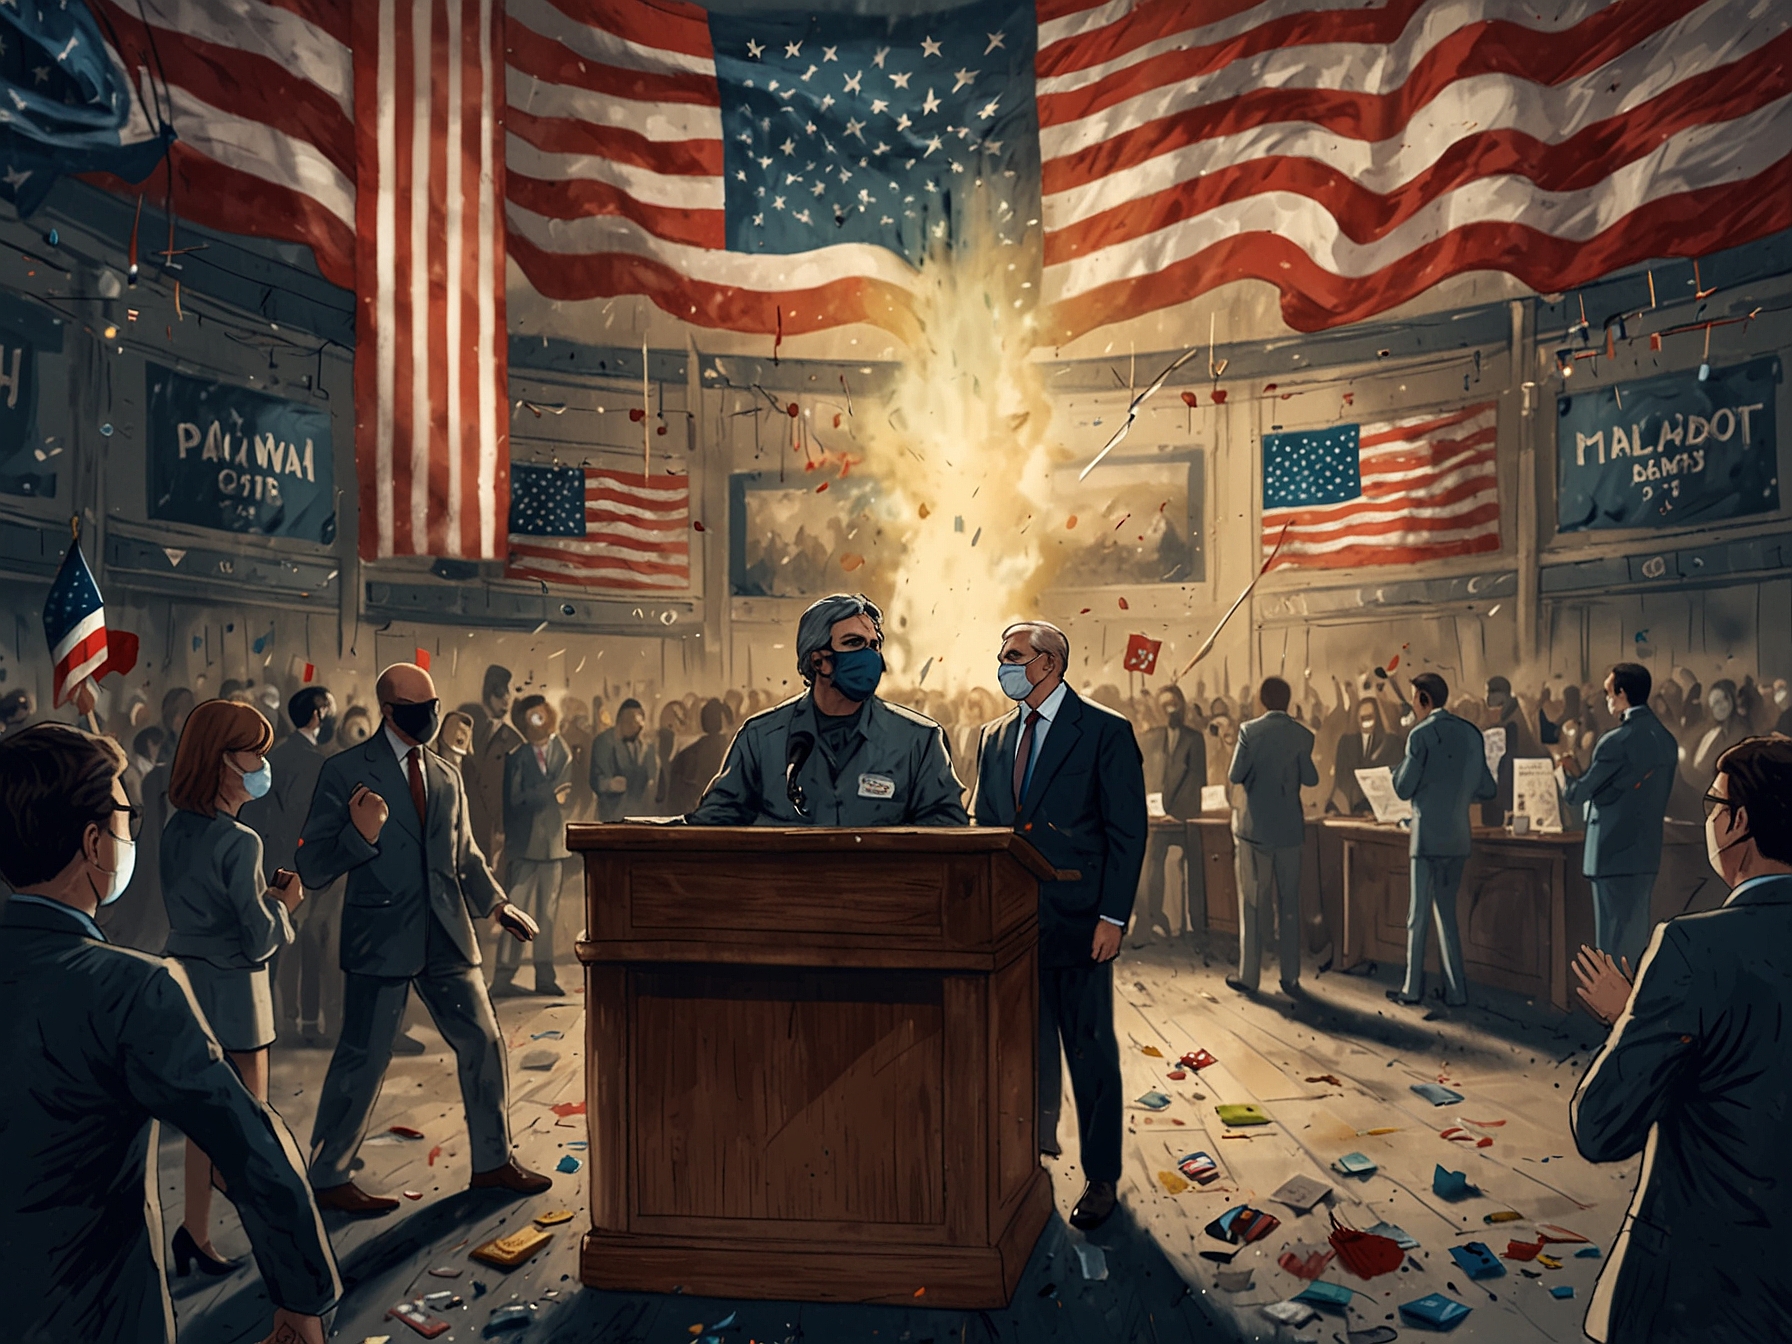 Illustration capturing the turbulent atmosphere of the 2020 election campaign, with elements representing the COVID-19 pandemic, social unrest, and technological influences.